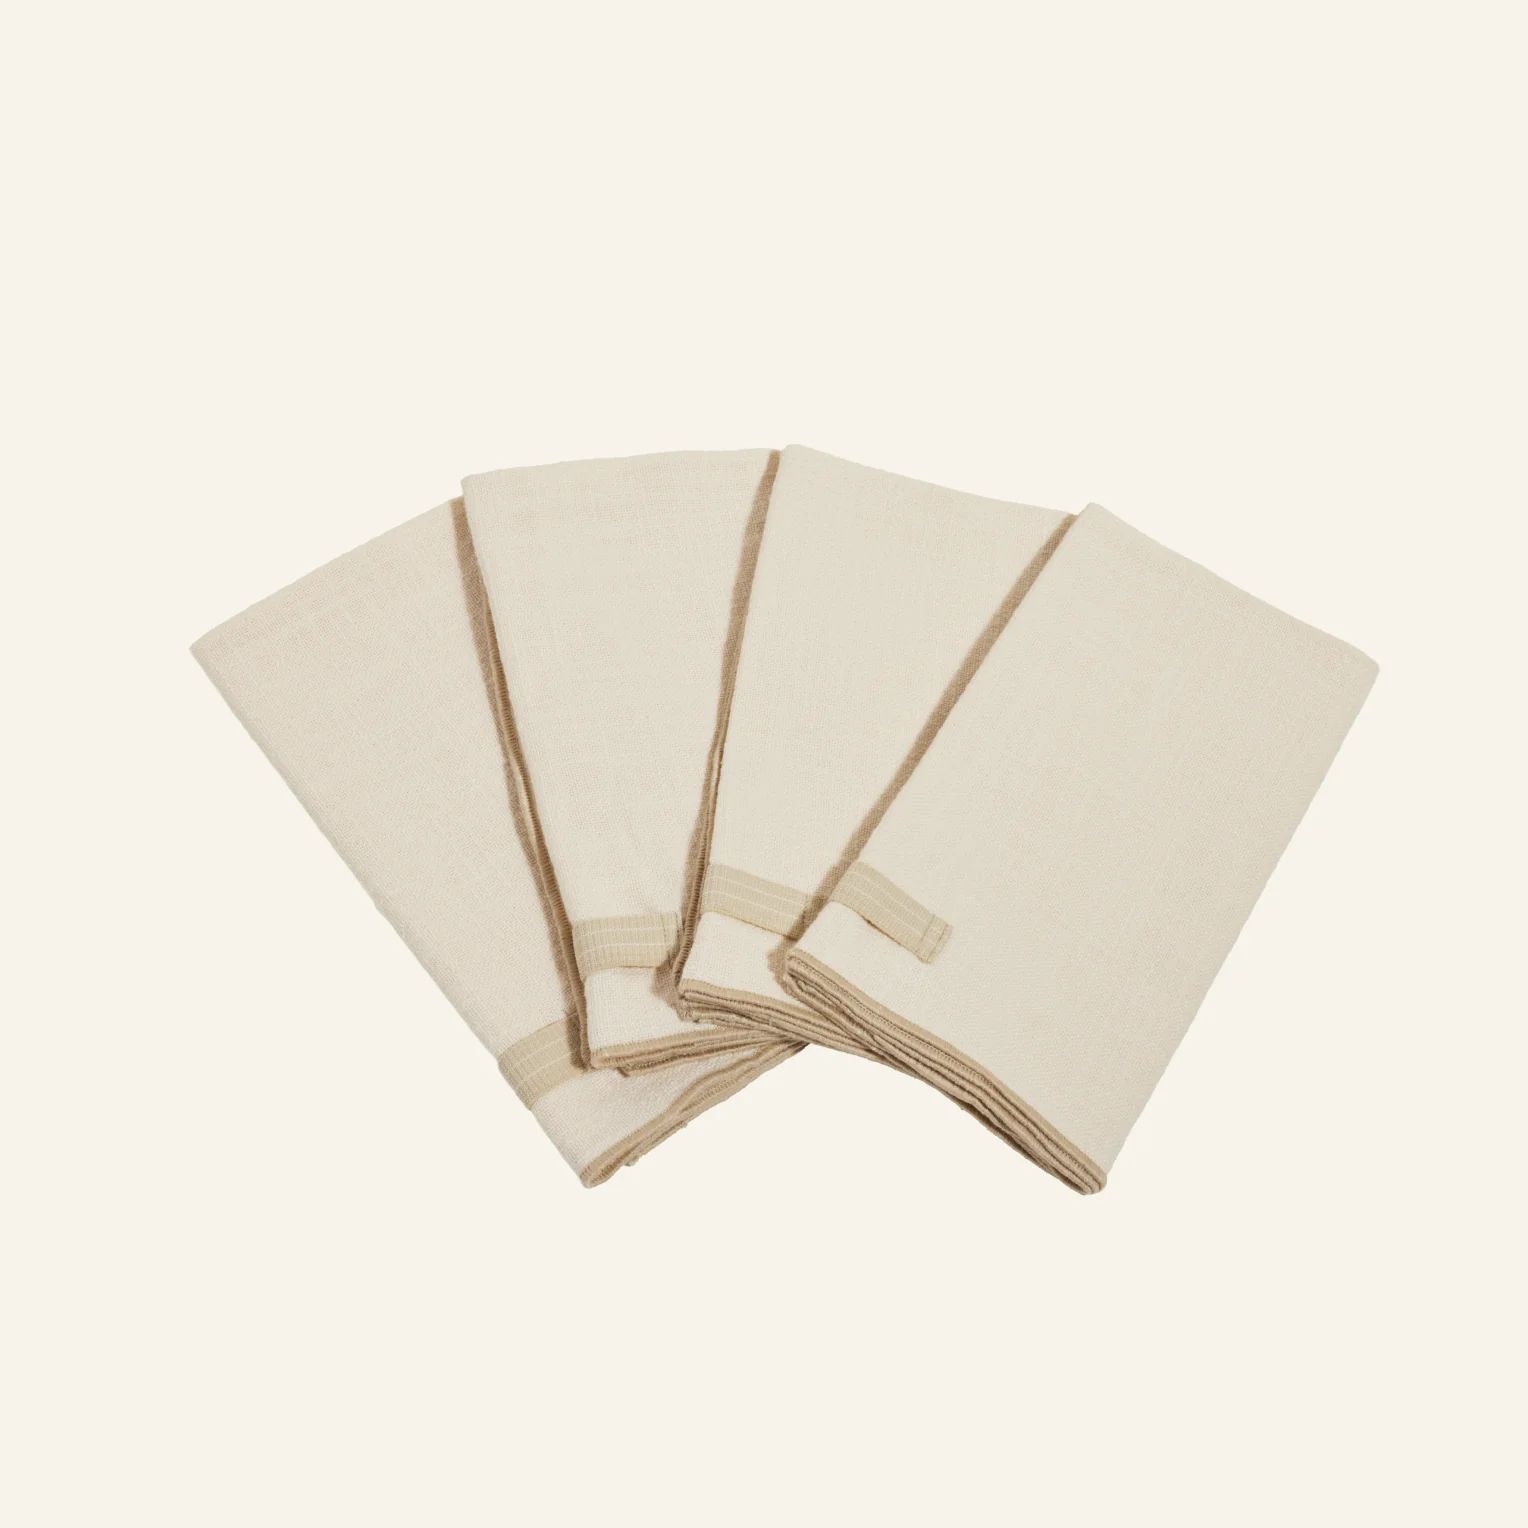 Loop Napkins | Our Place